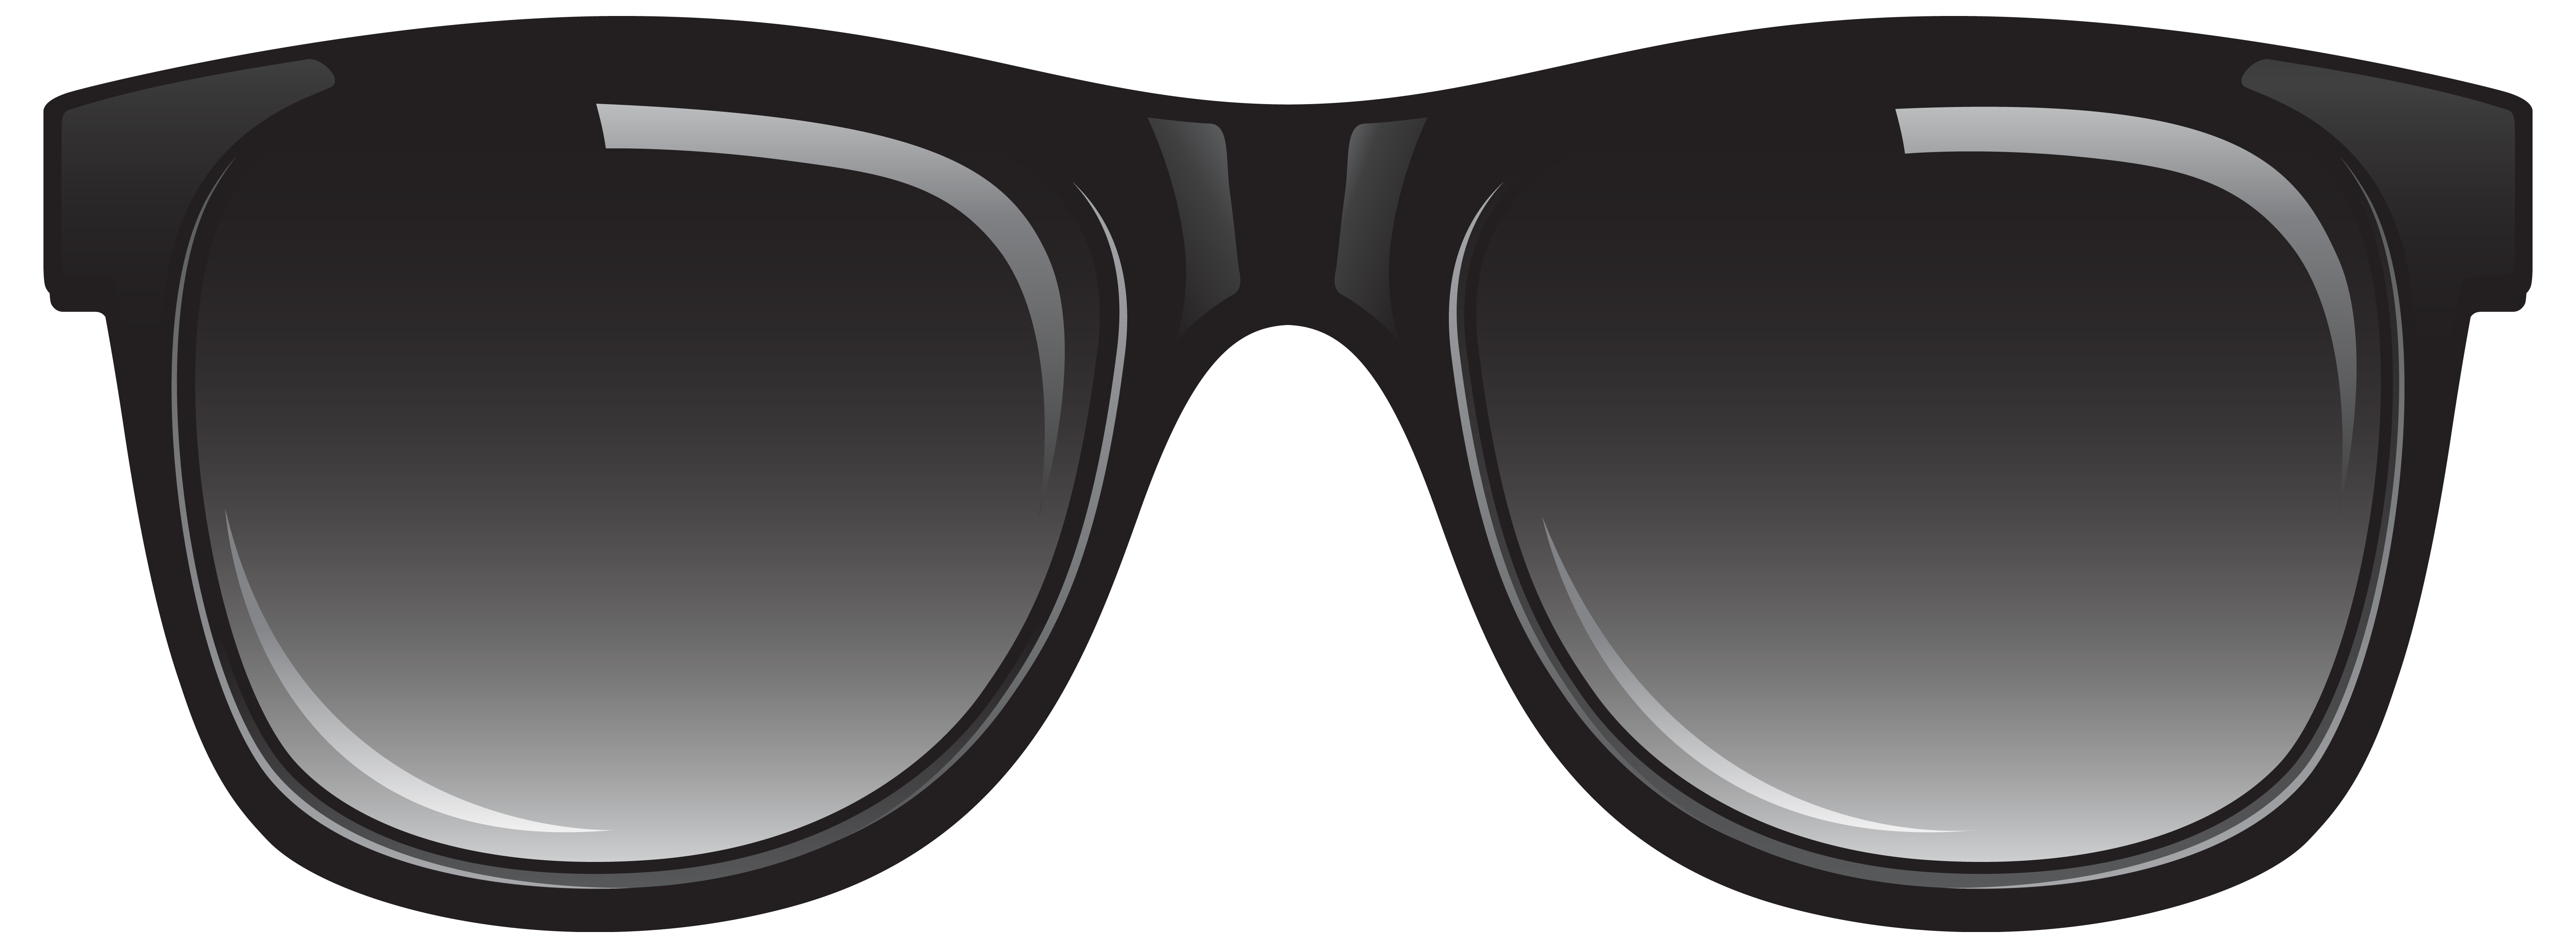 Download PNG image - Sunglasses PNG File 